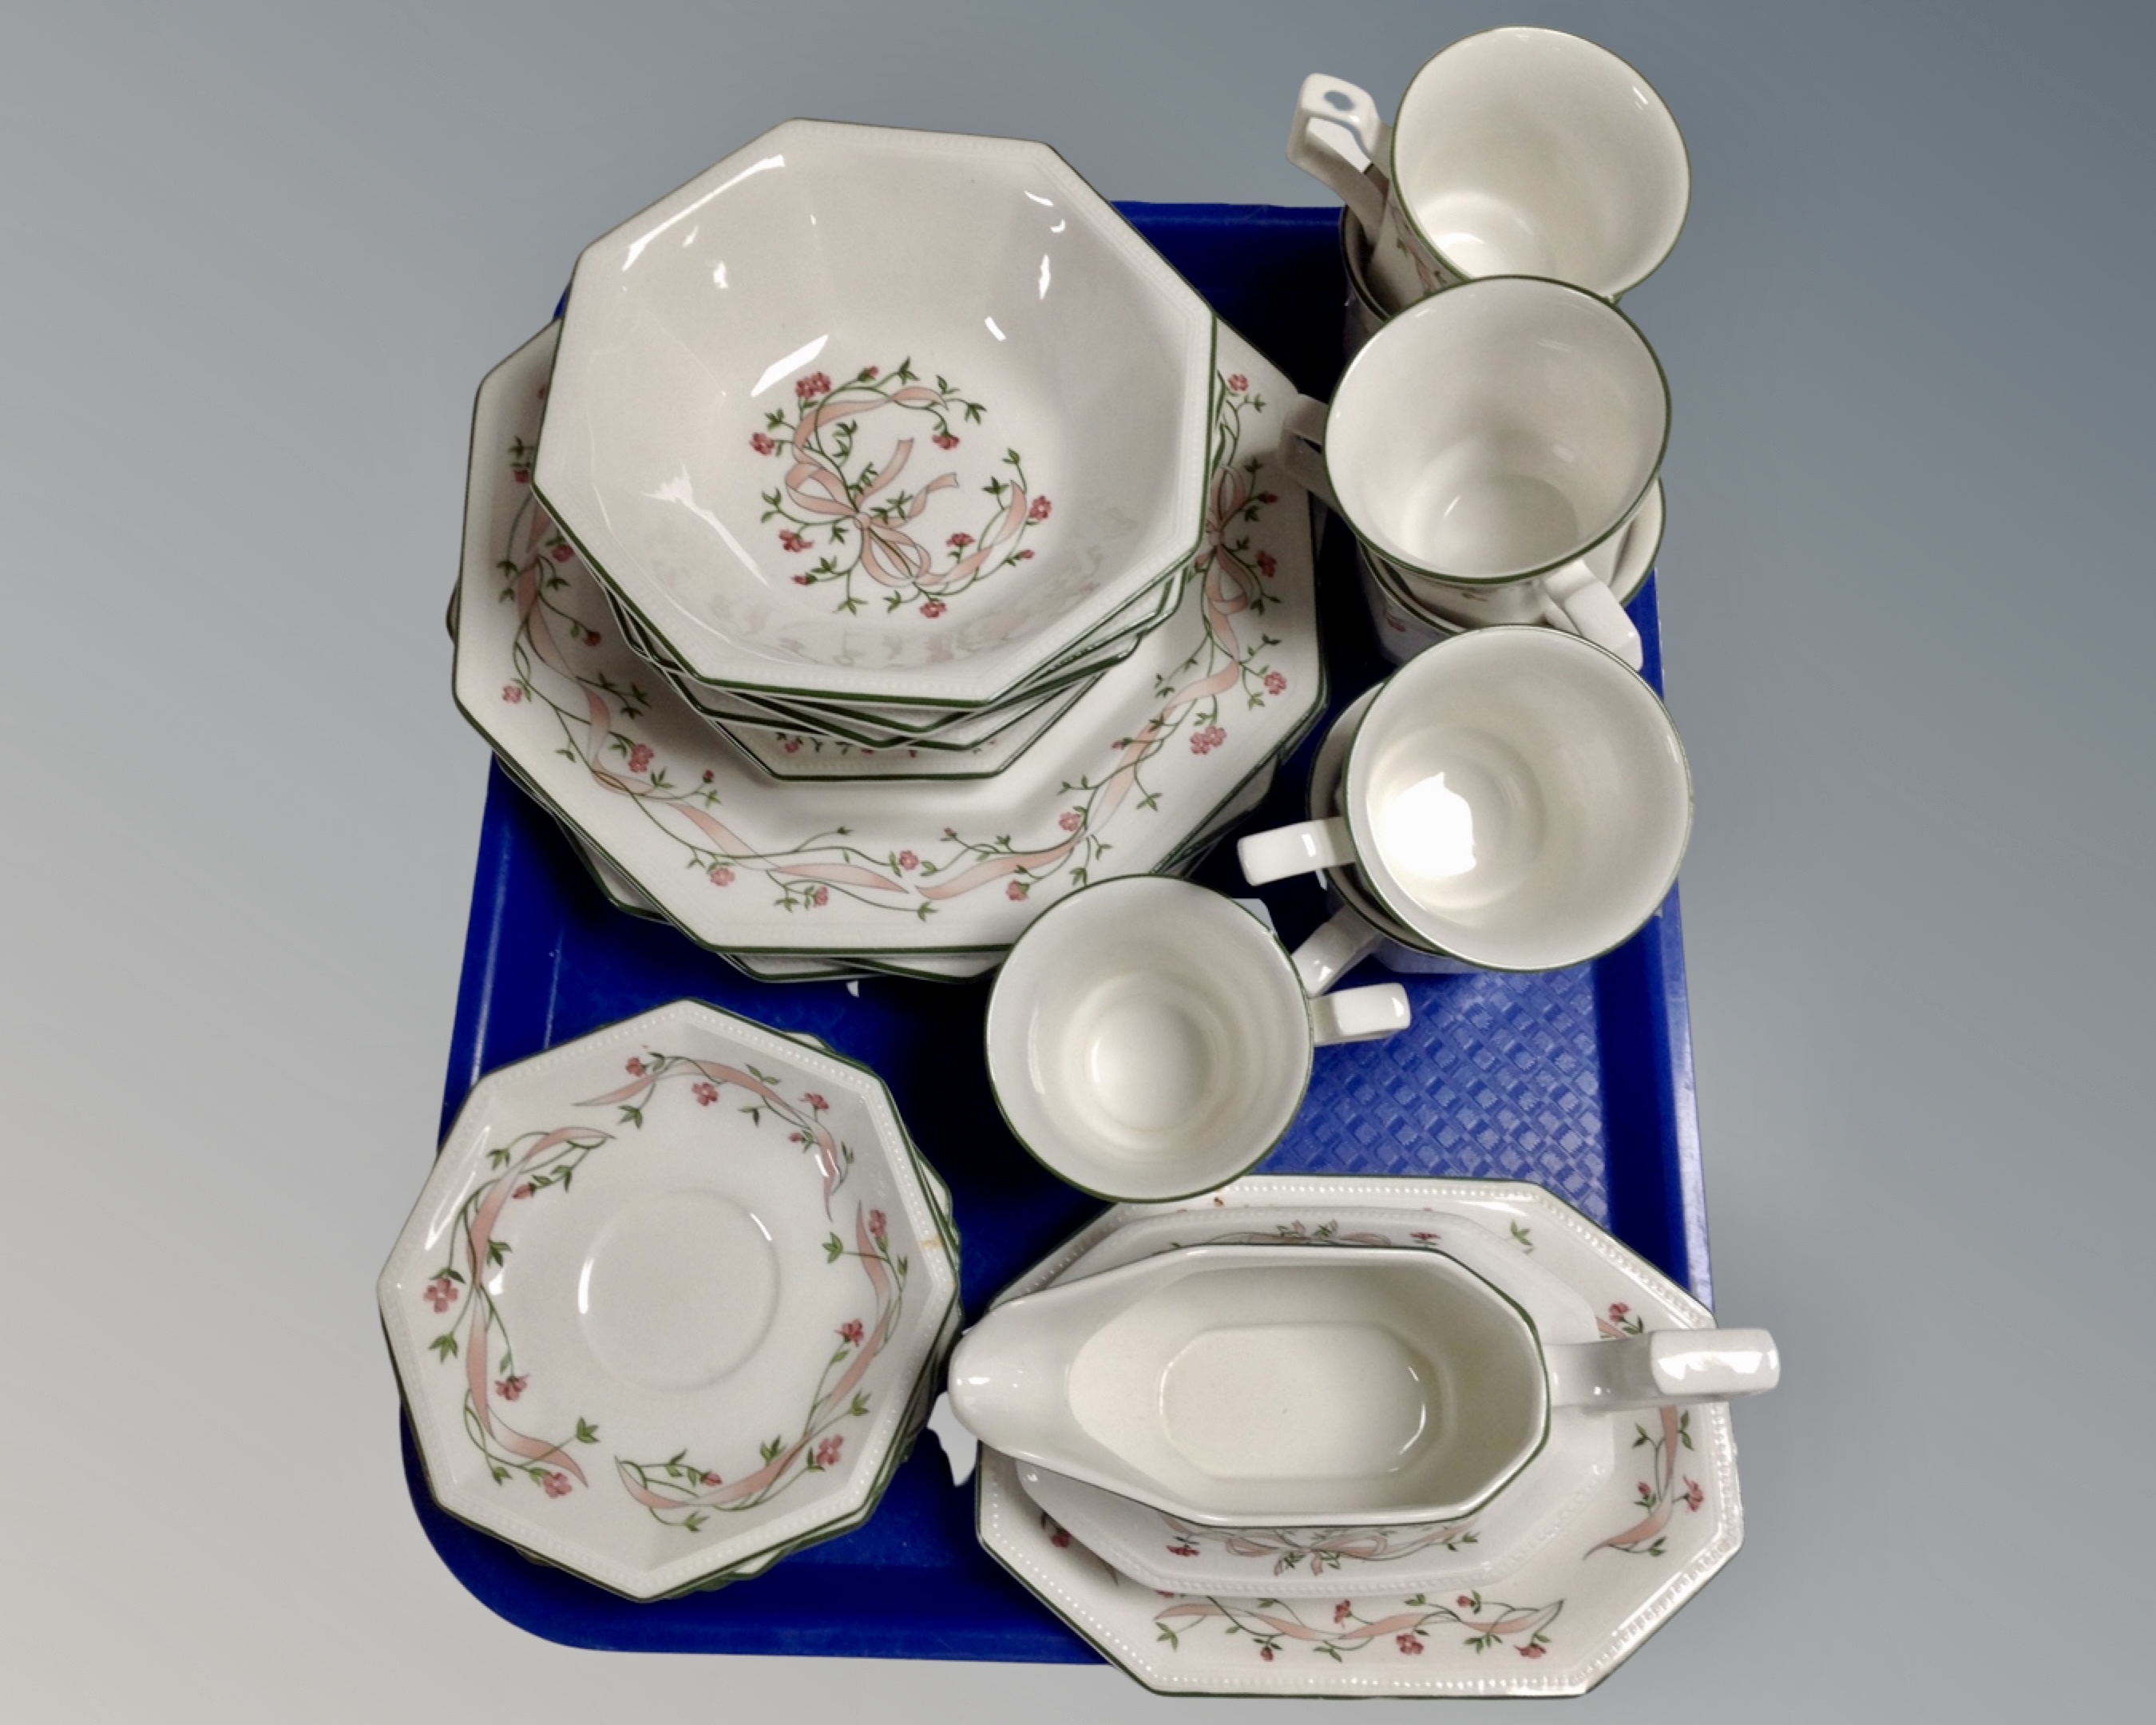 A tray of Johnson Brothers Eternal Bow tea and dinner ware